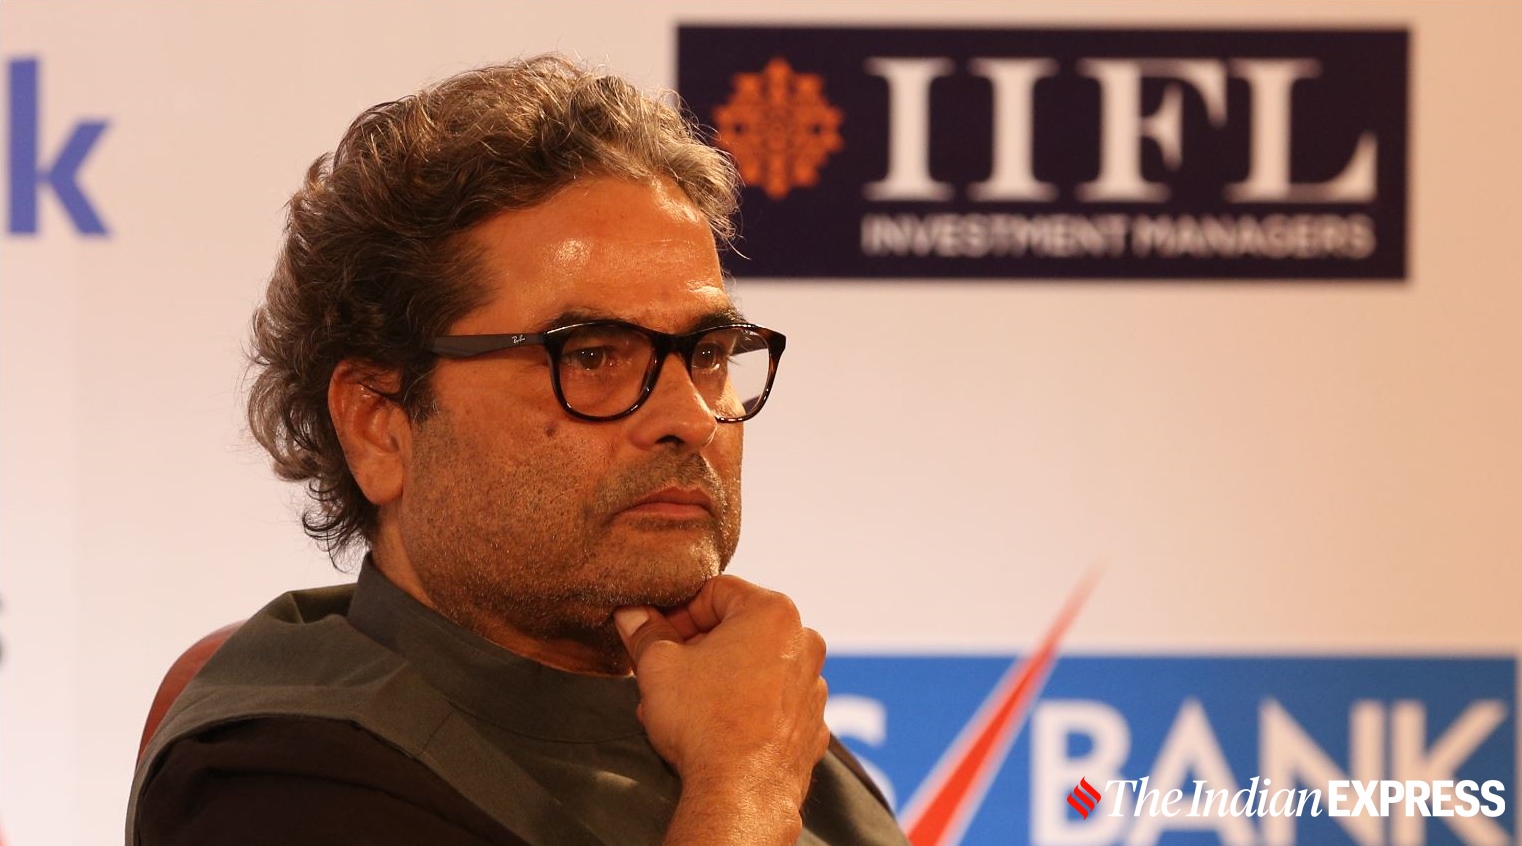 Vishal Bhardwaj adapted Shakespeare’s Macbeth to Maqbool, Othello to Omkara and Hamlet to Haider [Image Credit: The Indian Express]